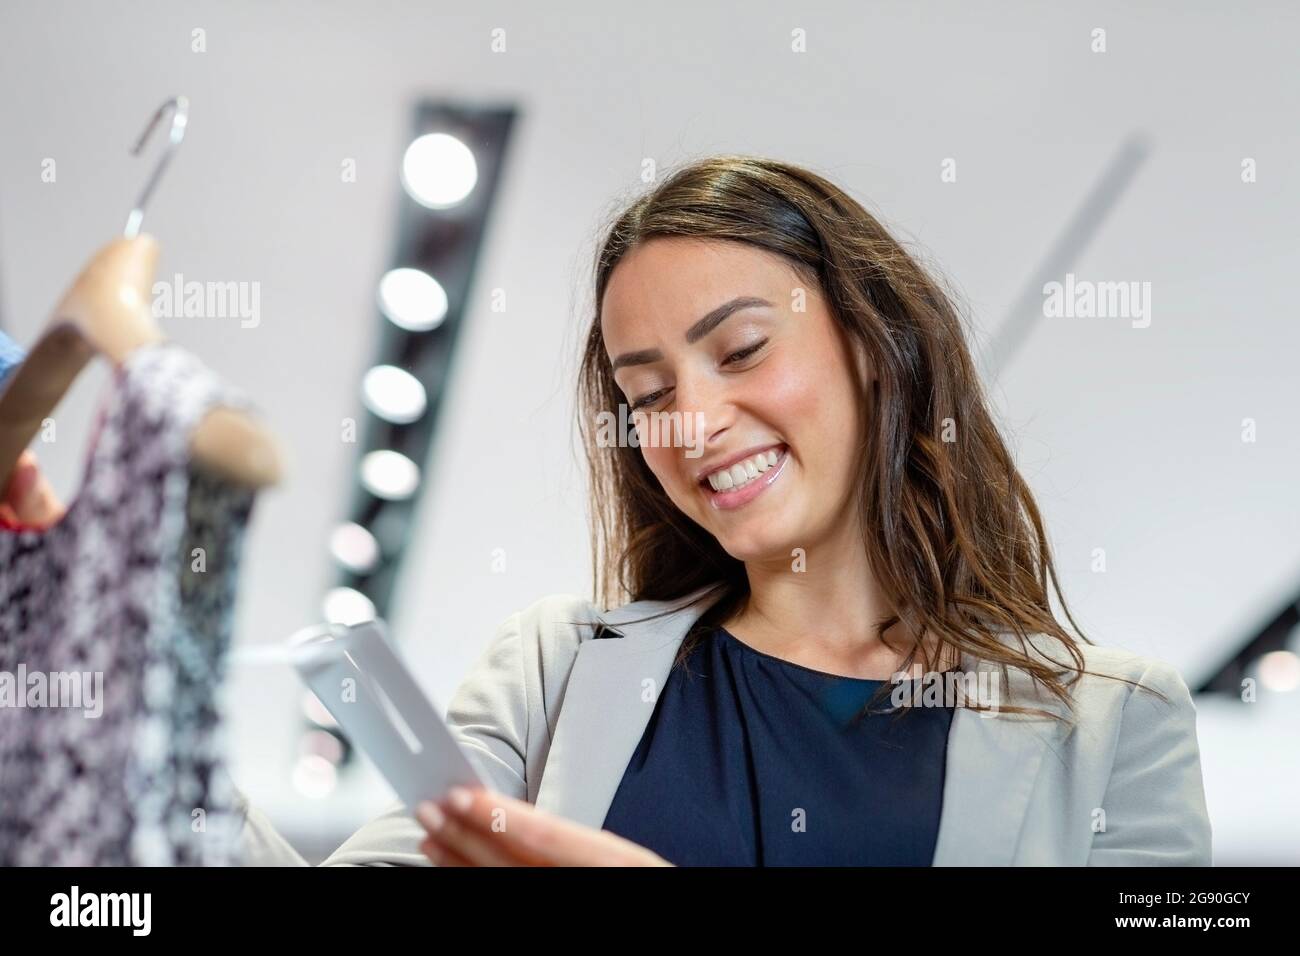 Smiling woman looking at price tag in boutique Stock Photo